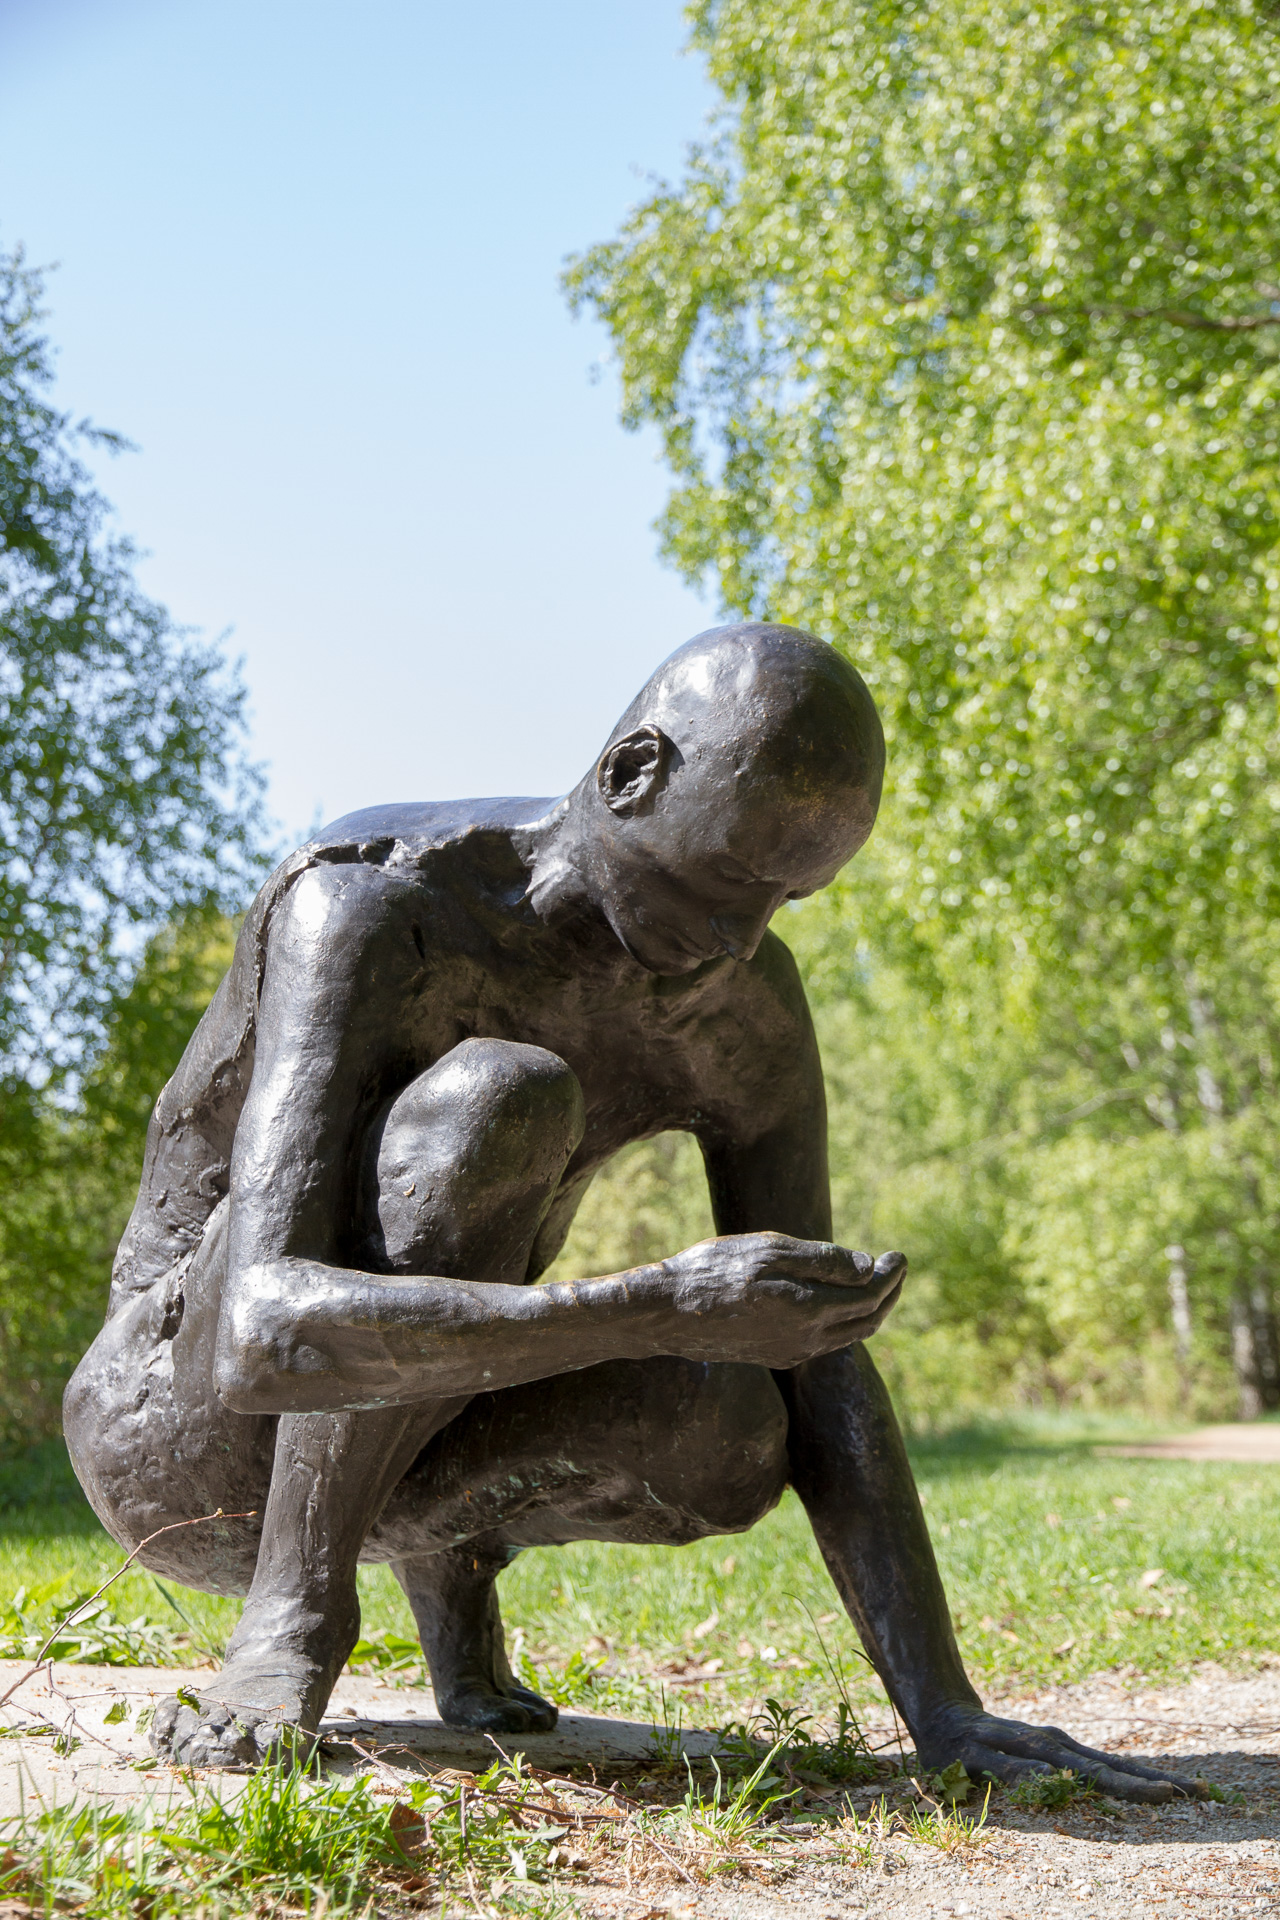 Sculpture of a man in concrete and bronze who is kneeling and has picked up something from the ground.